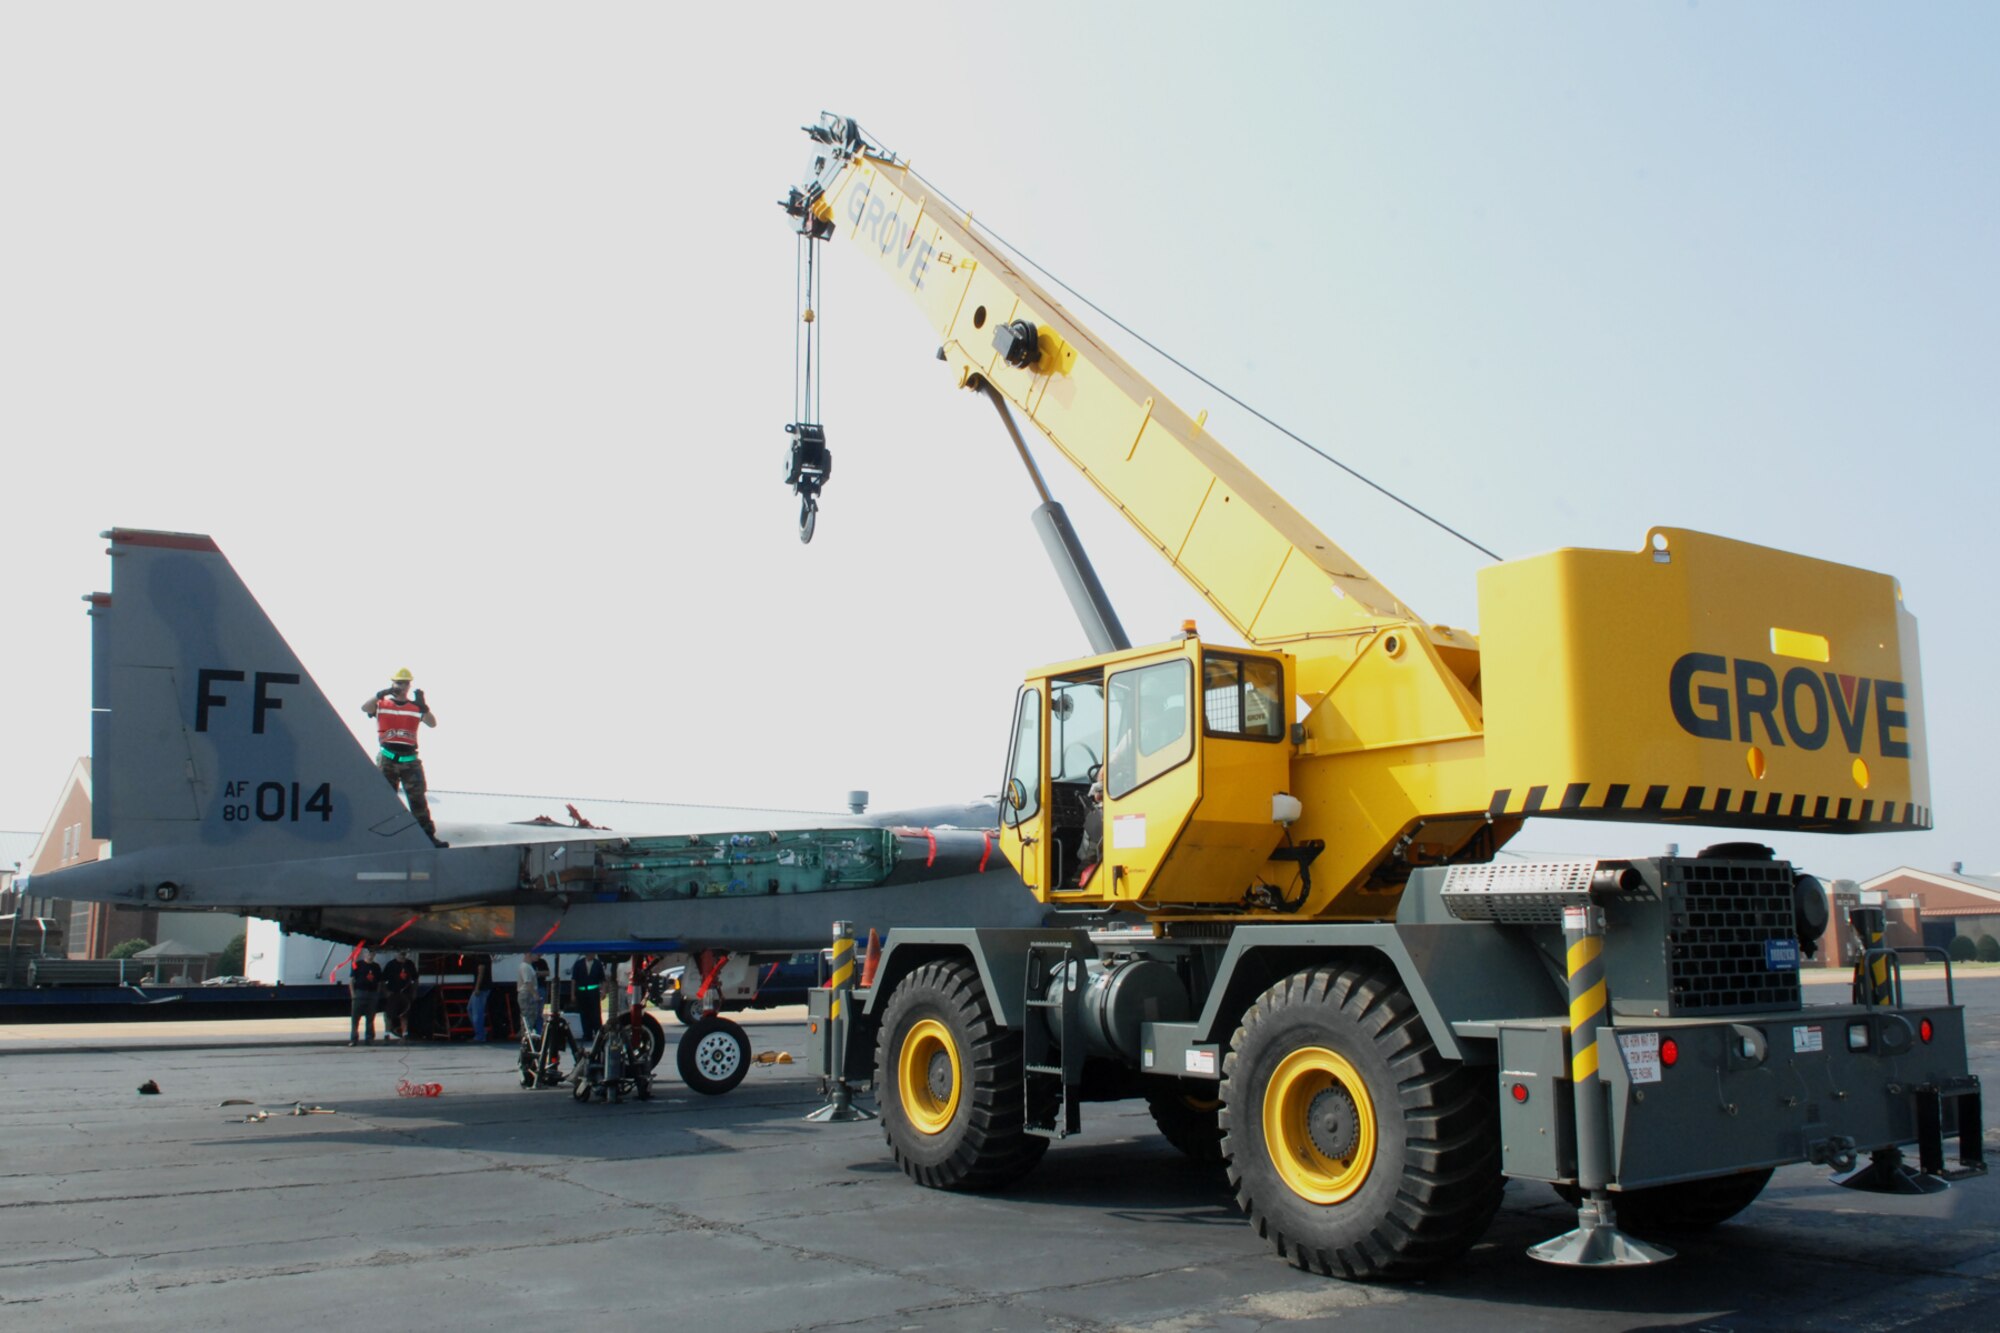 Airmen from the 1st Maintenance Squadron, Maintenance Flight, Package Maintenance and Plan team, use a crane to lift an F-15 Eagle to be secured on a flatbed truck July 21, at Langley Air Force Base, Va. The F-15 will be transported to the Chico Air Museum in Chico, Calif., where it will be on permanent display as part of the “Freedom Eagle” exhibit. (U.S. Air Force photo by Staff Sgt. Jeff Nevison/Released)